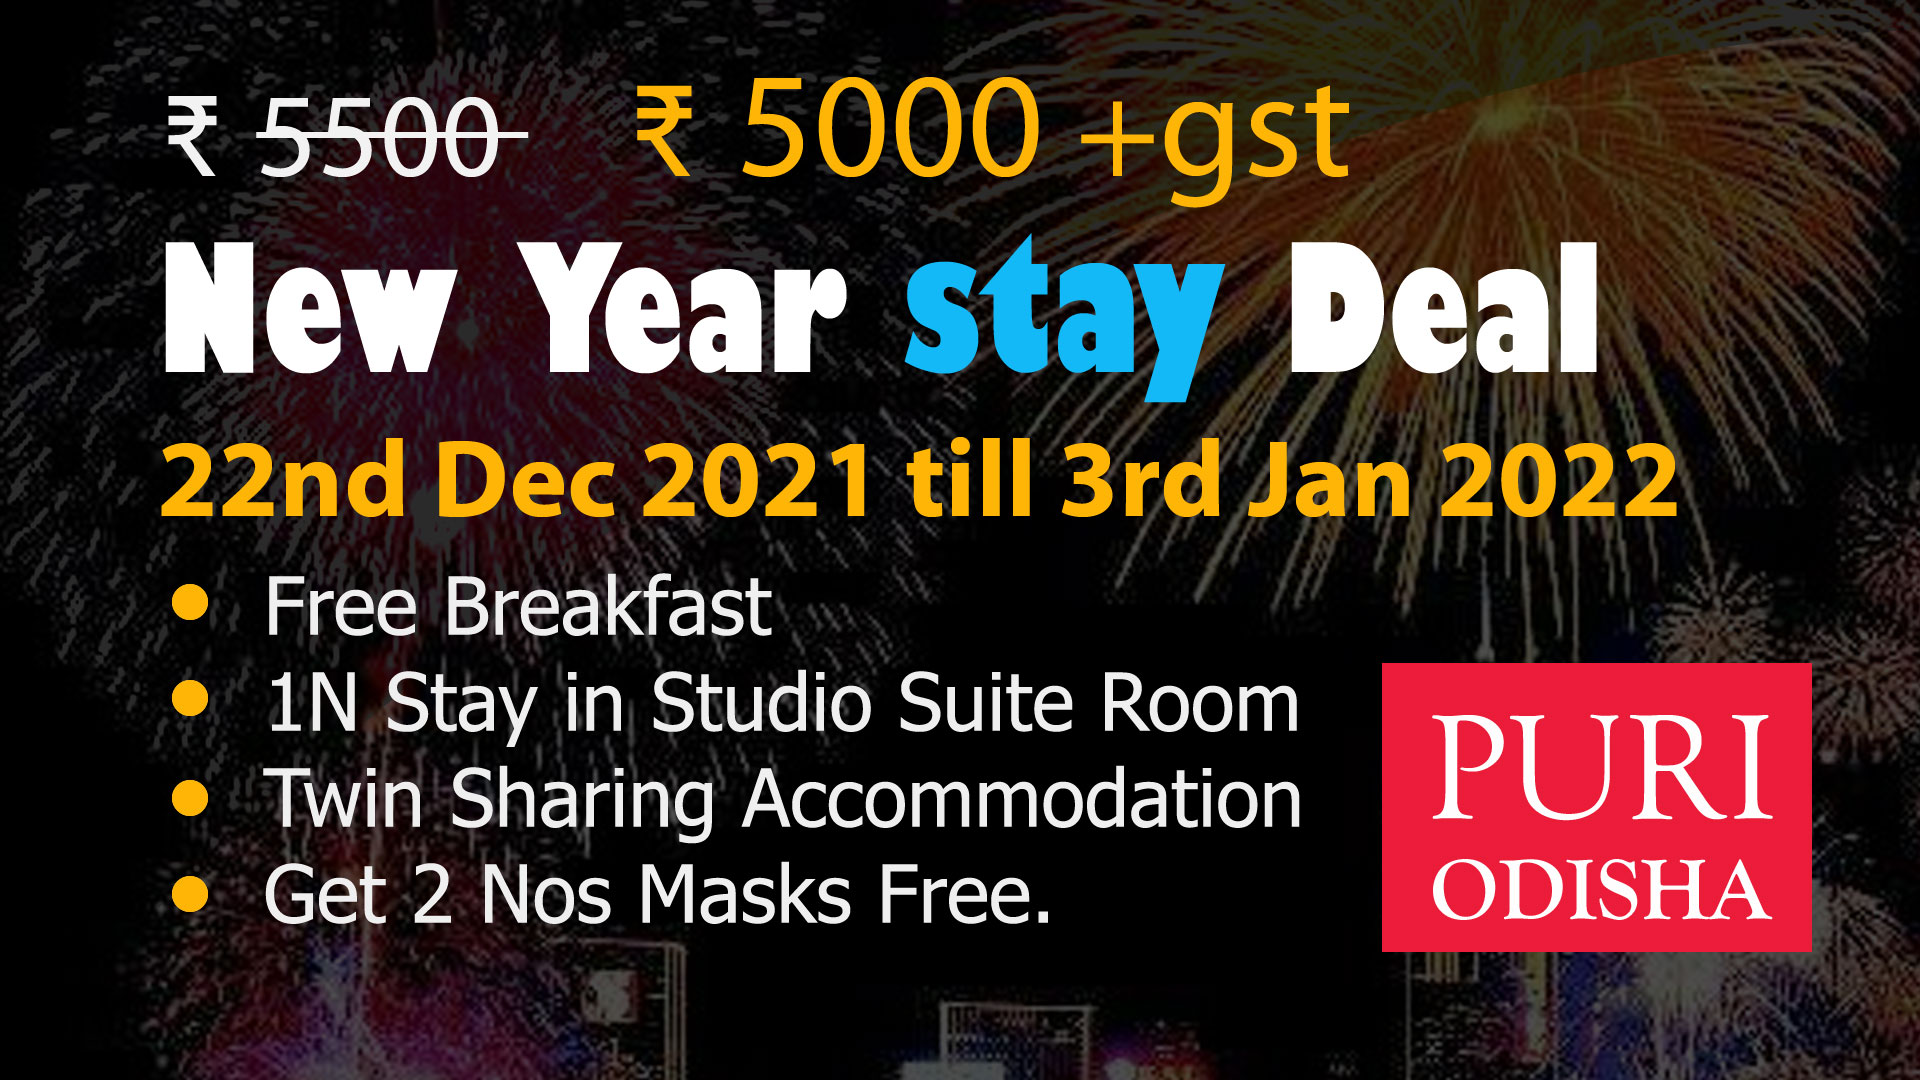 CHRISTMAS & NEW YEAR STAY DEAL